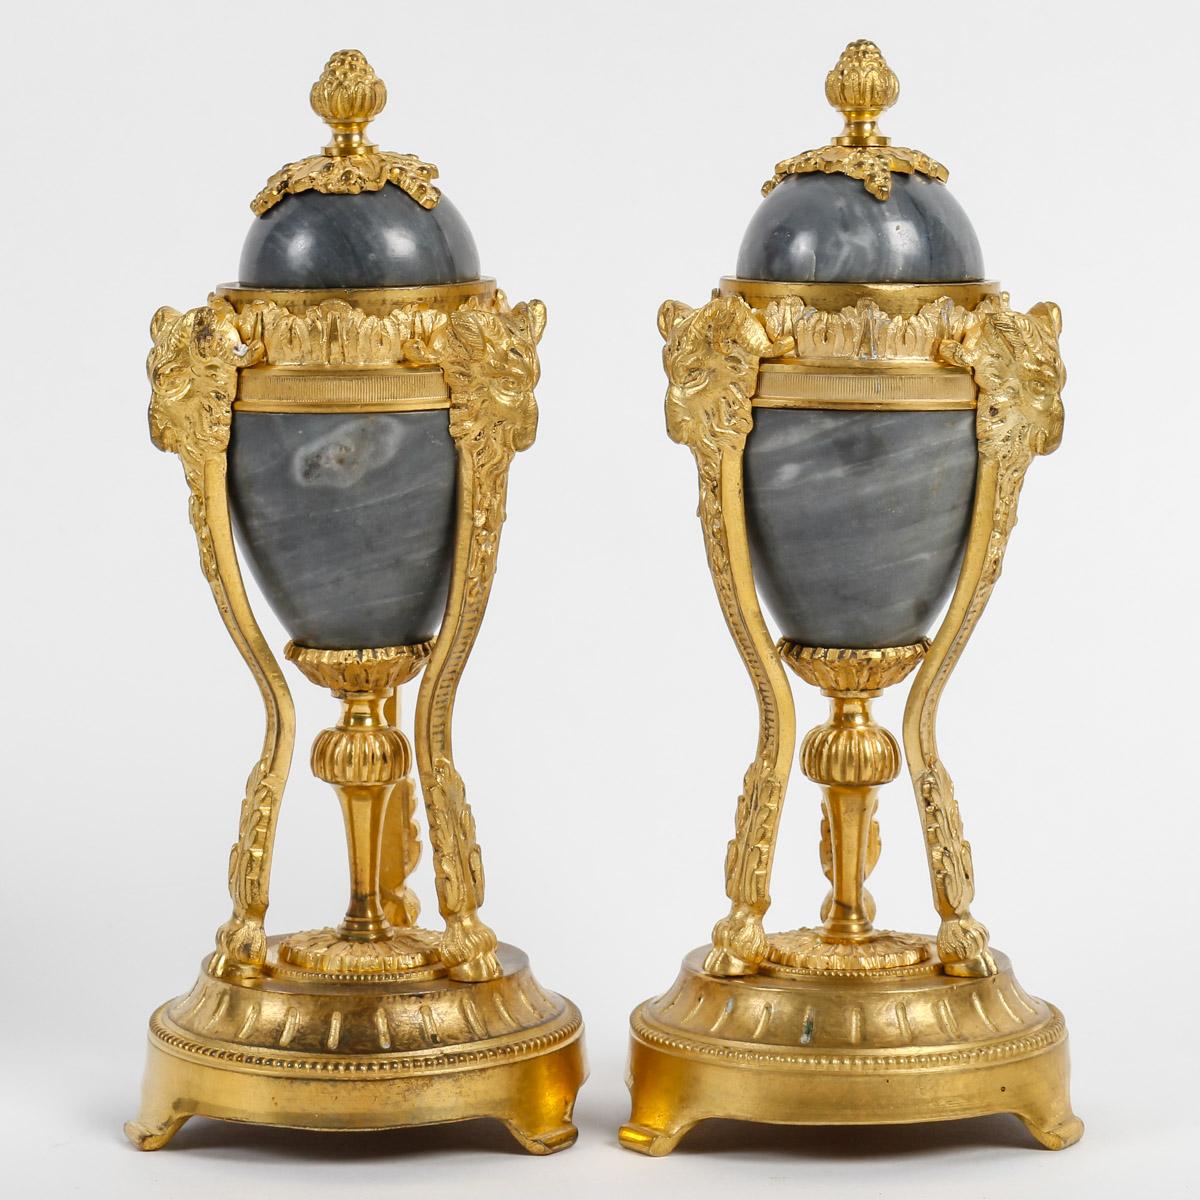 French 19th century Pair of Cassolettes Convertible in Candlesticks
Pair of cassolettes in Bleu Turquin marble and ormolu ornamentation.
Tripod base finished in sabots and decorated with ram's heads.
Lid with a seeded grip, reversible into a